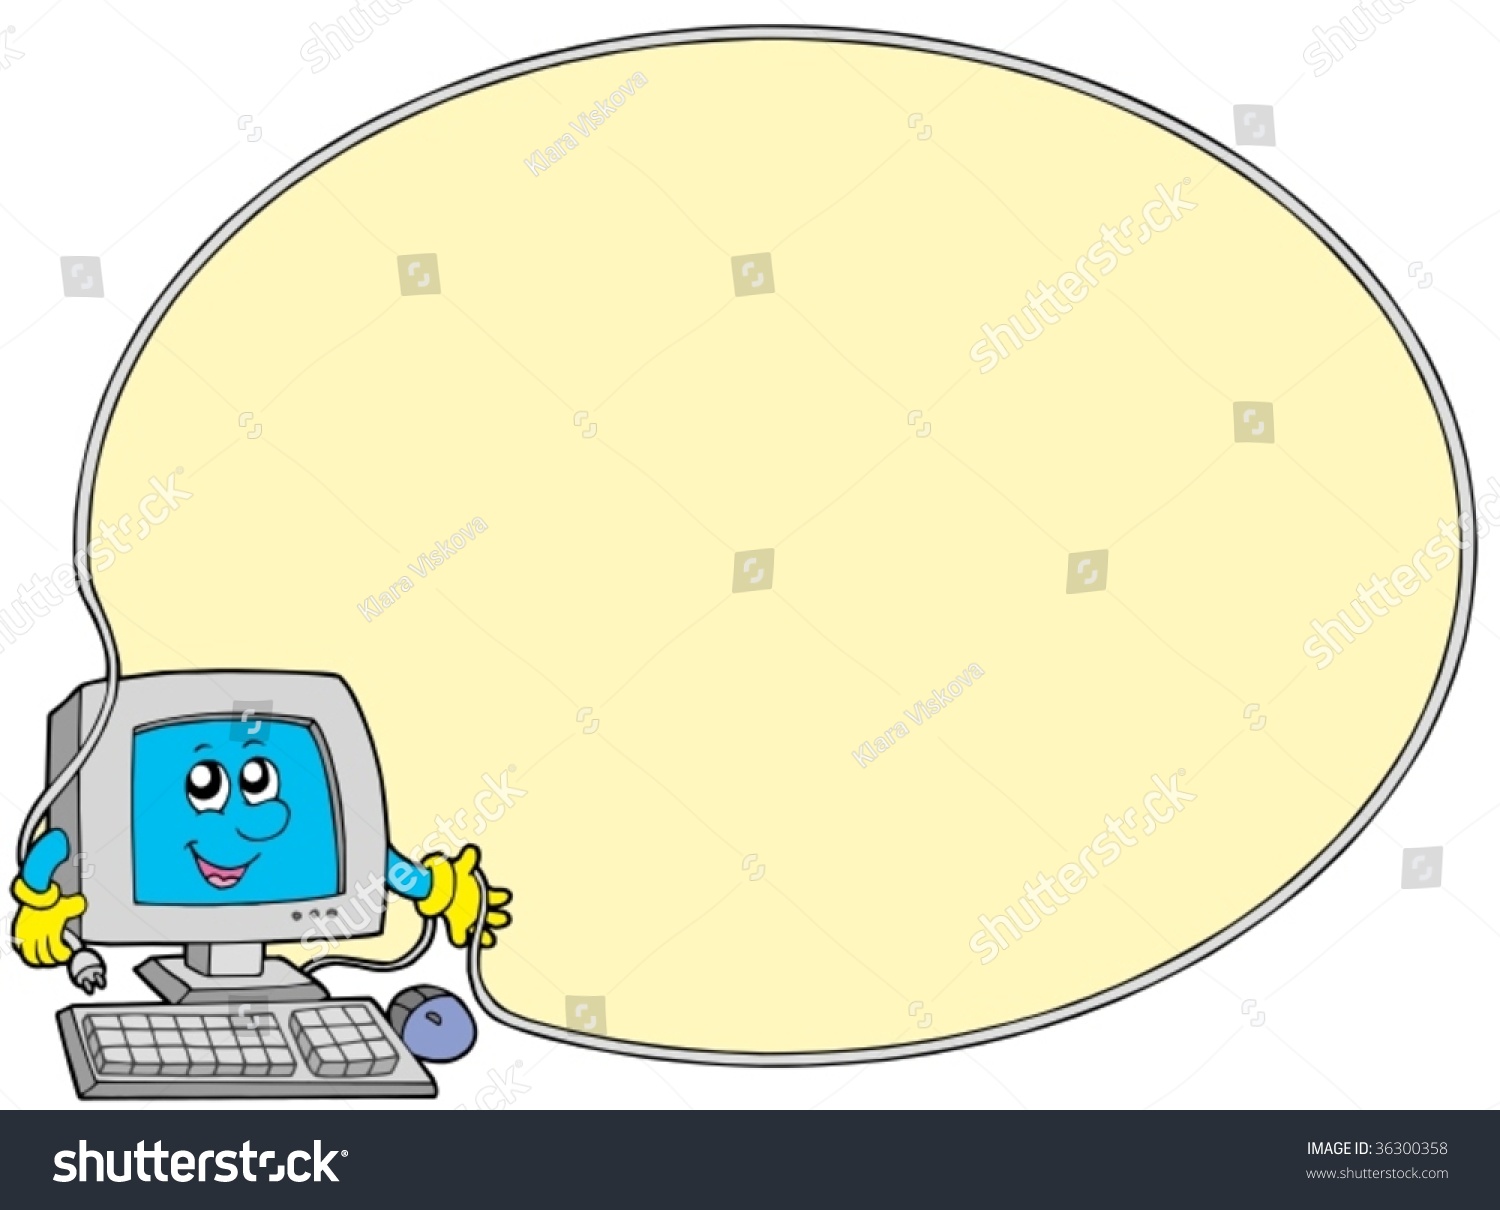 Computer Round Frame Vector Illustration Stock Vector (Royalty Free